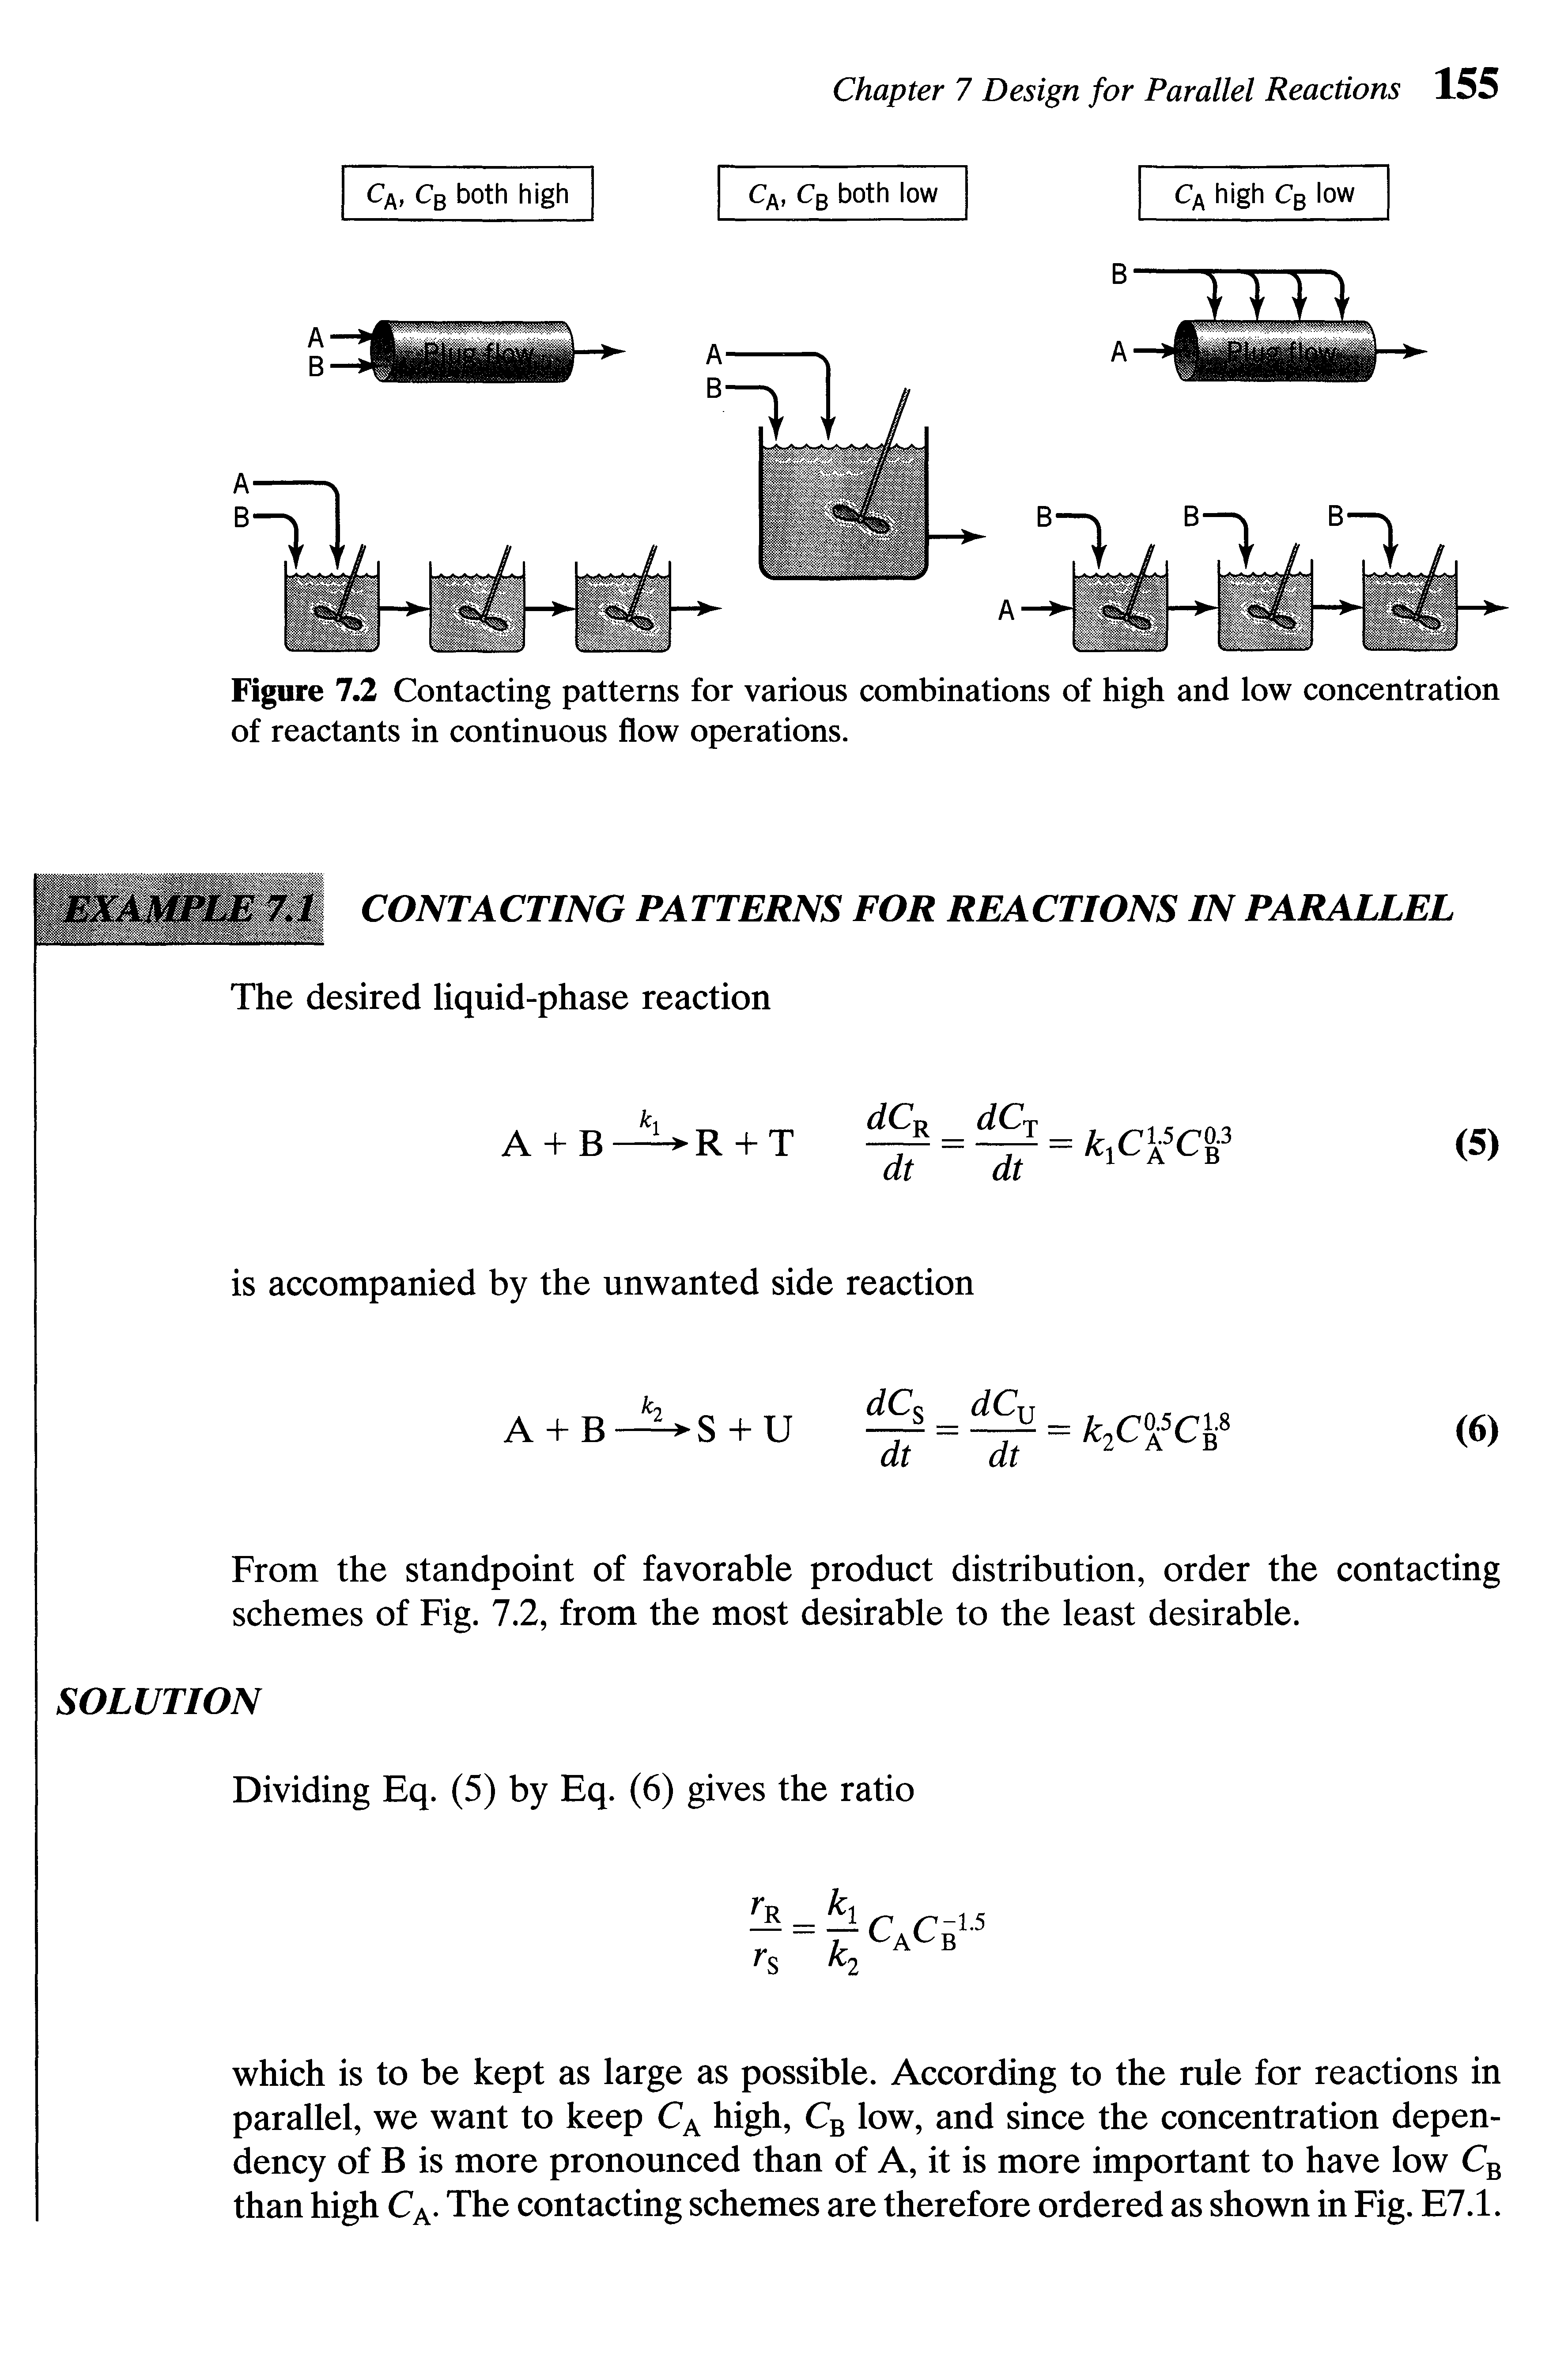 Figure 7.2 Contacting patterns for various combinations of high and low concentration of reactants in continuous flow operations.